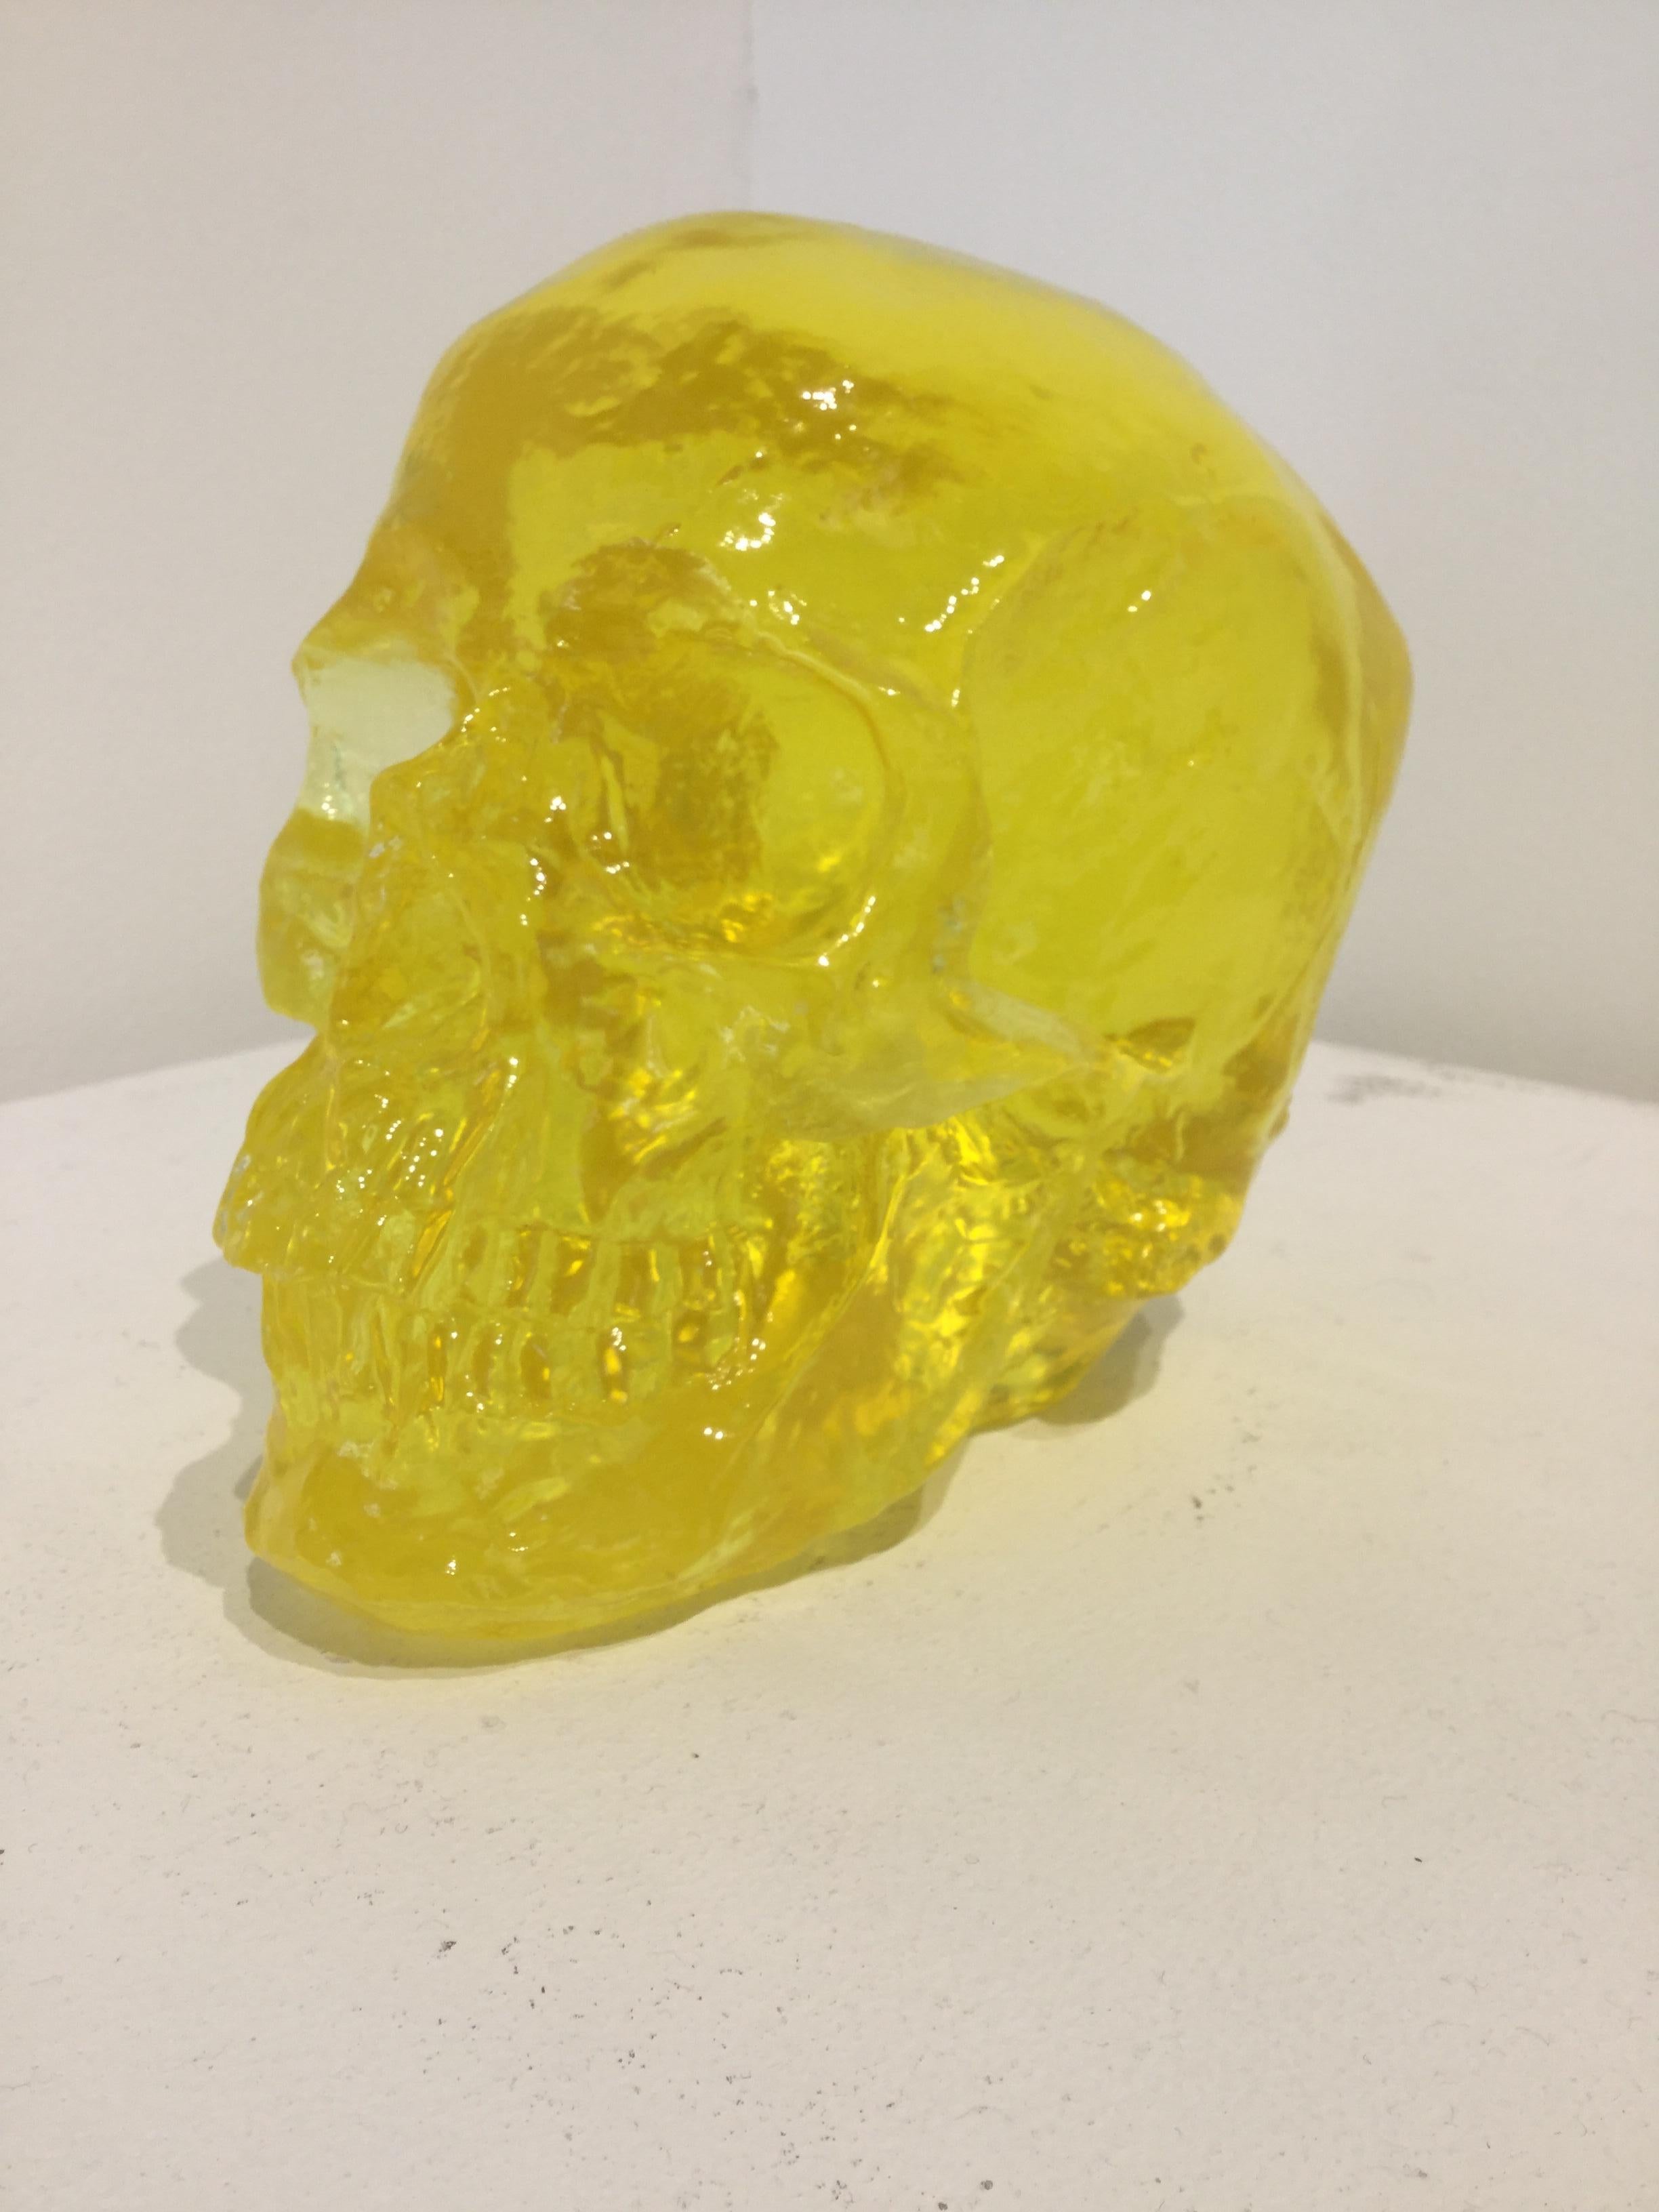 Sam Tufnell
Lemon Skull
6" x 3" x 5" 
Resin Sculpture
2018

Part of Sam Tuffnell’s creative desire is to find new ways to convey traditional subject matter as well as his own childish motives to move against the art establishment.  For him the